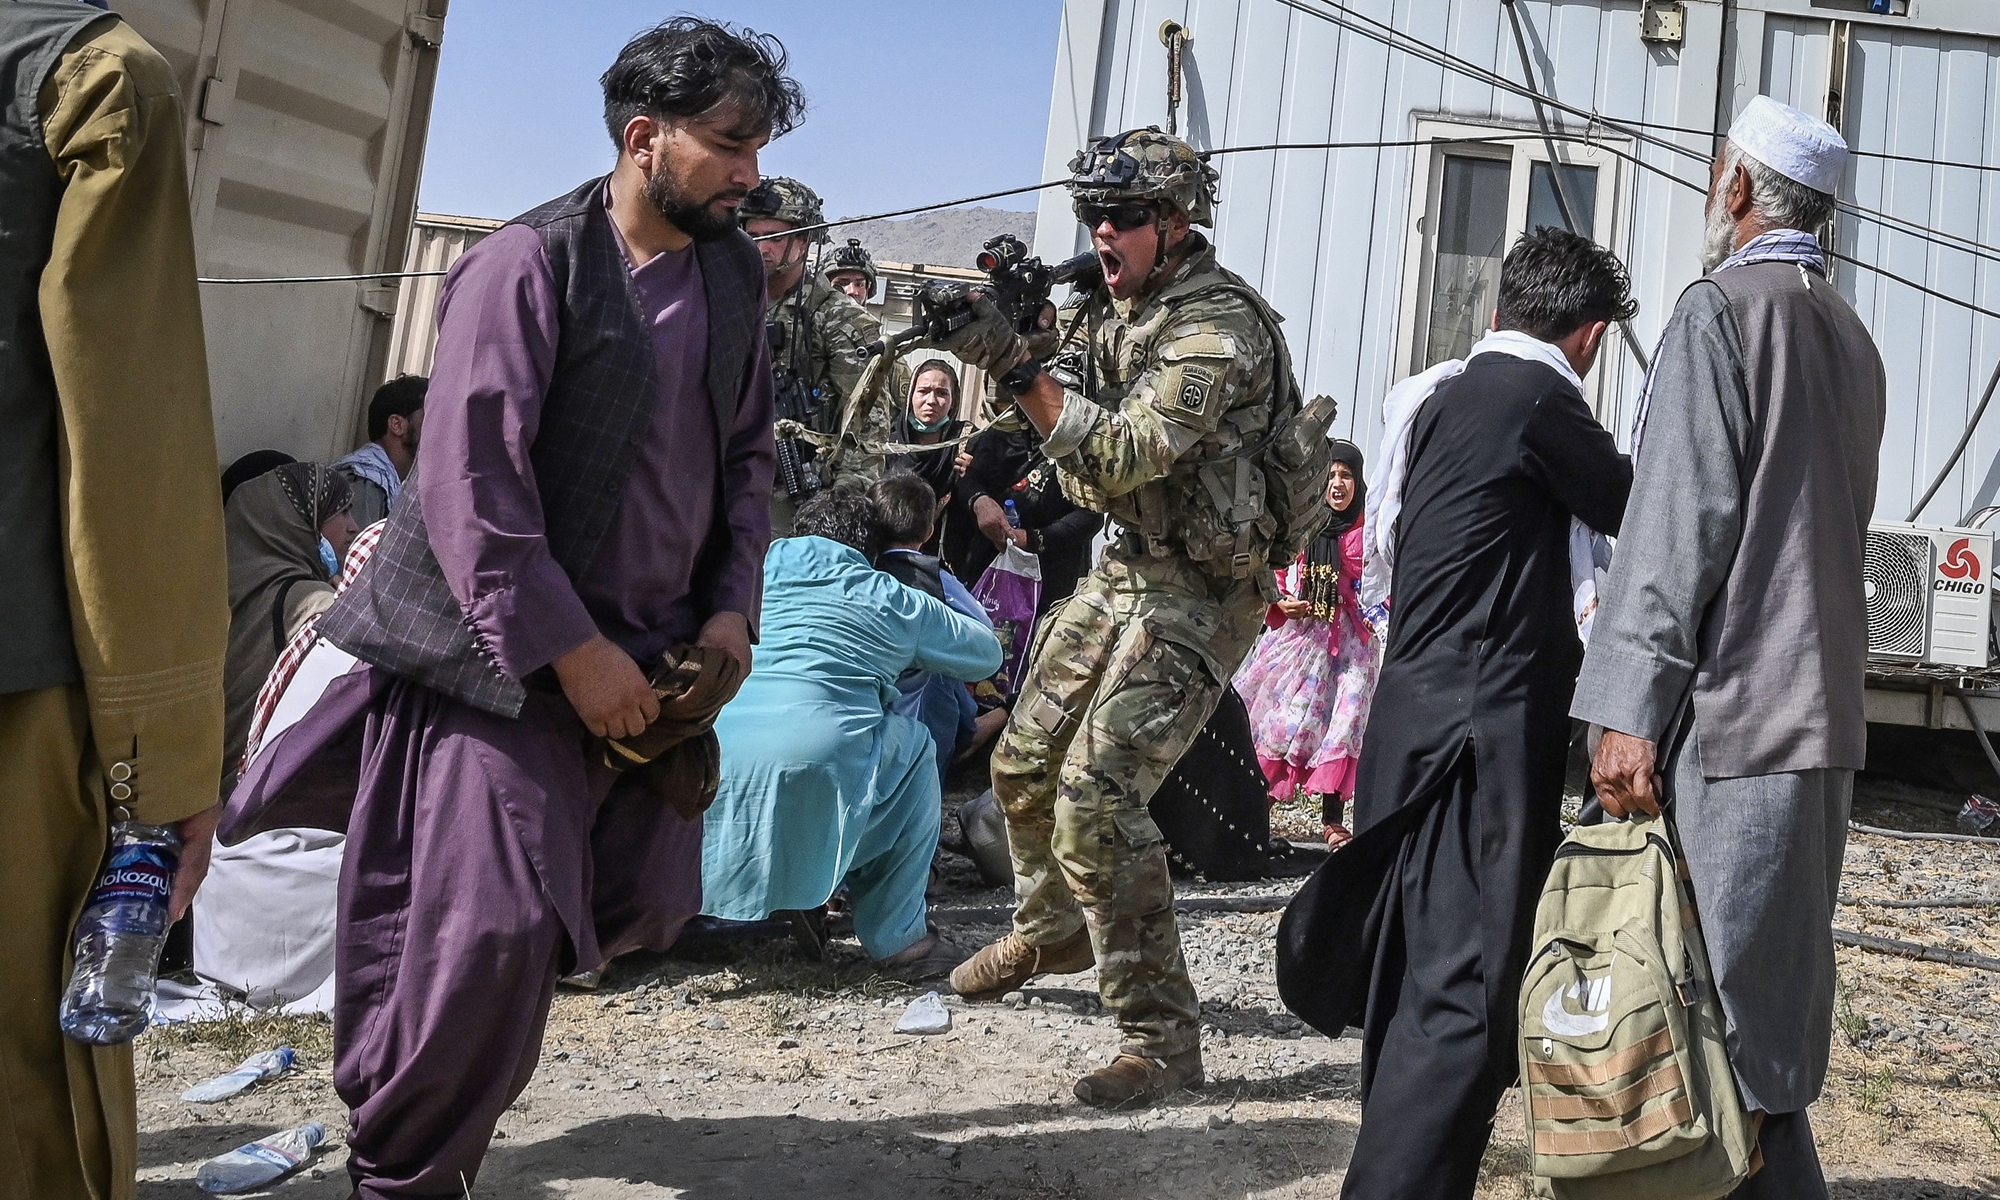 A US soldier (center) points his gun at an Afghan passenger at Kabul airport on Monday as thousands of people mobbed the city's airport trying to flee the country. Photo: AFP